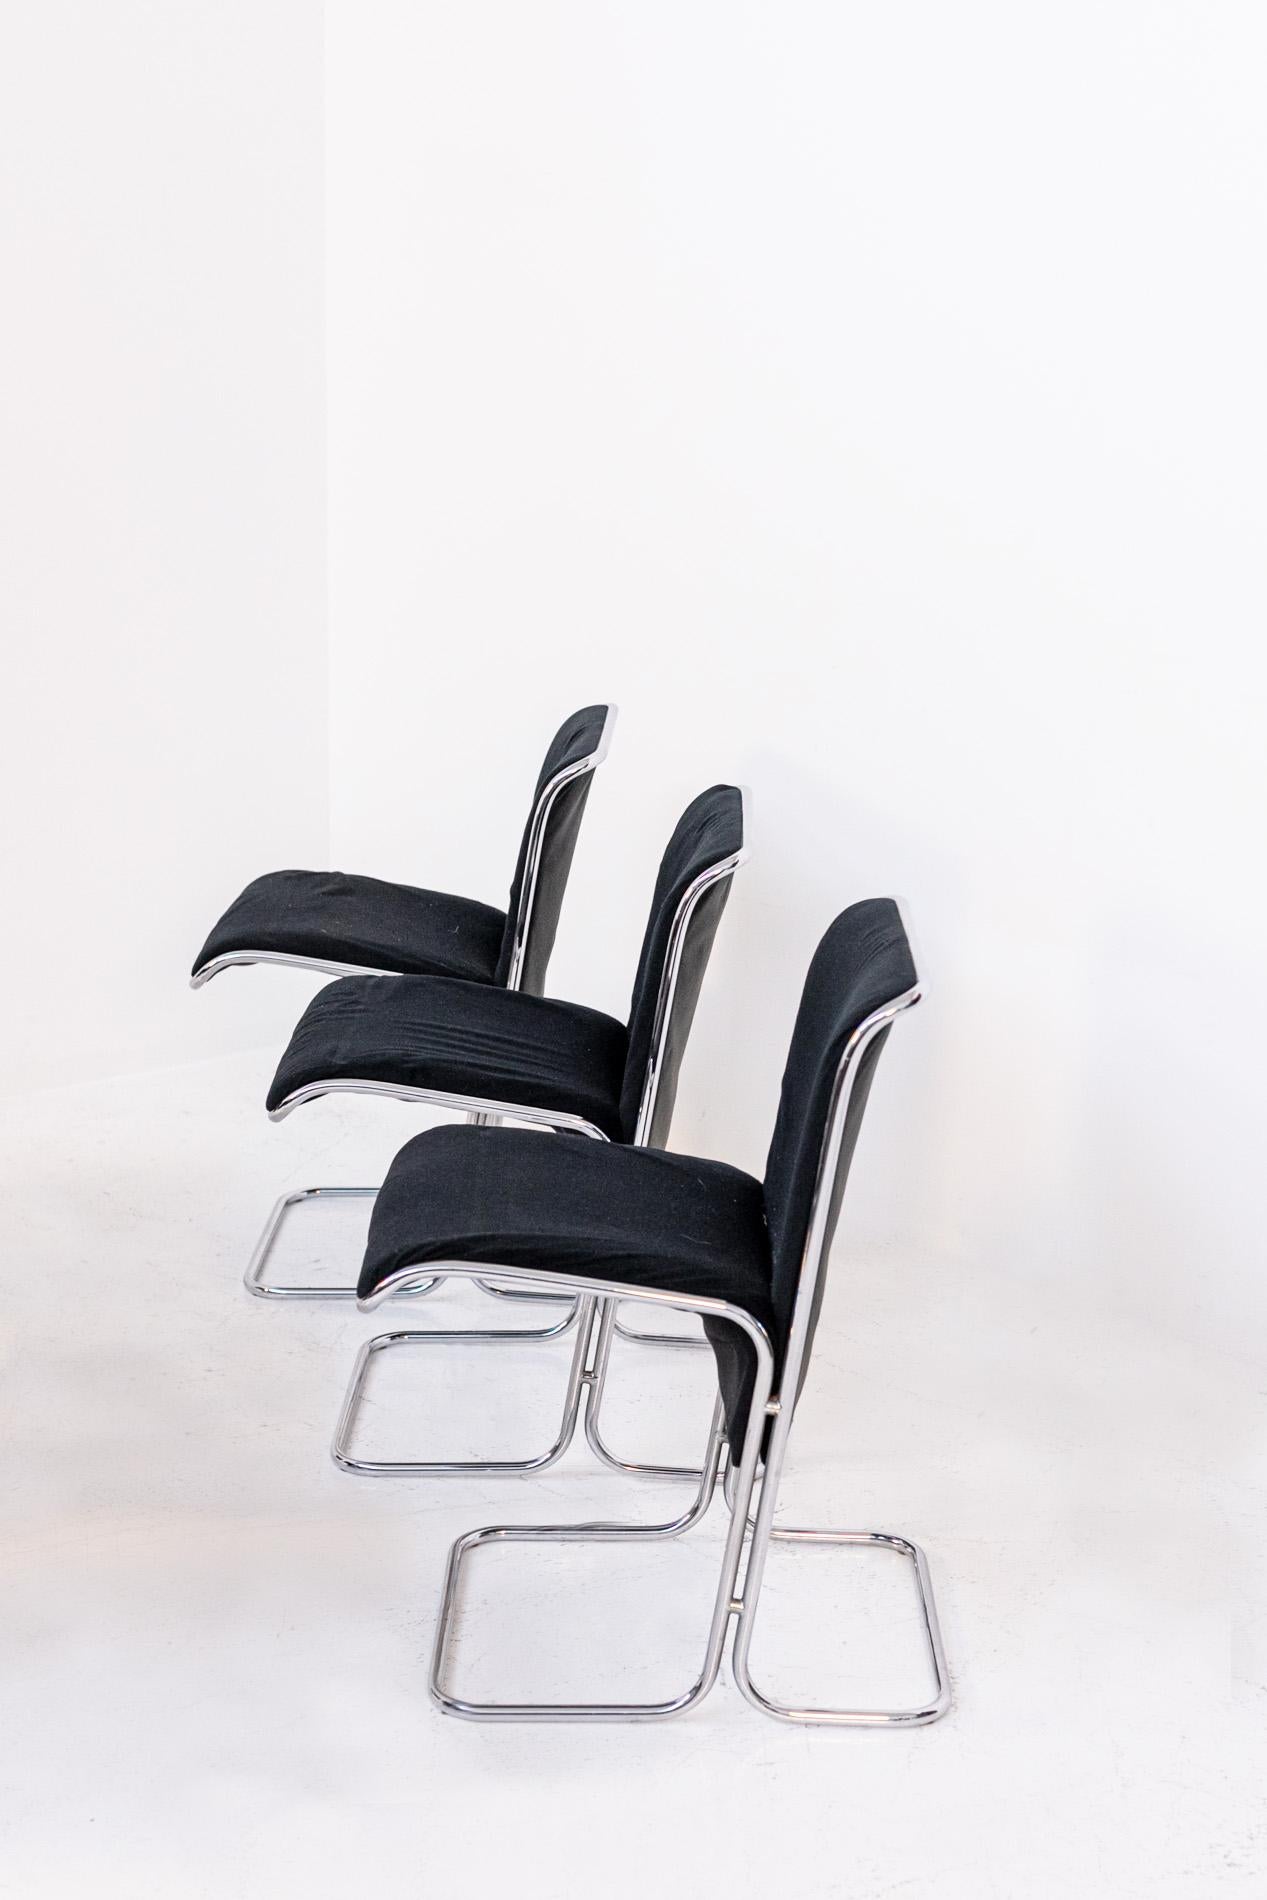 Eccentric set of six chairs designed by Antonio Ari Colombo for the Arflex manufacture in the 1970s. The chairs are made of tubular steel for its structure. The line of the chairs is harmonious and fluid. The peculiarity of the seat is its very